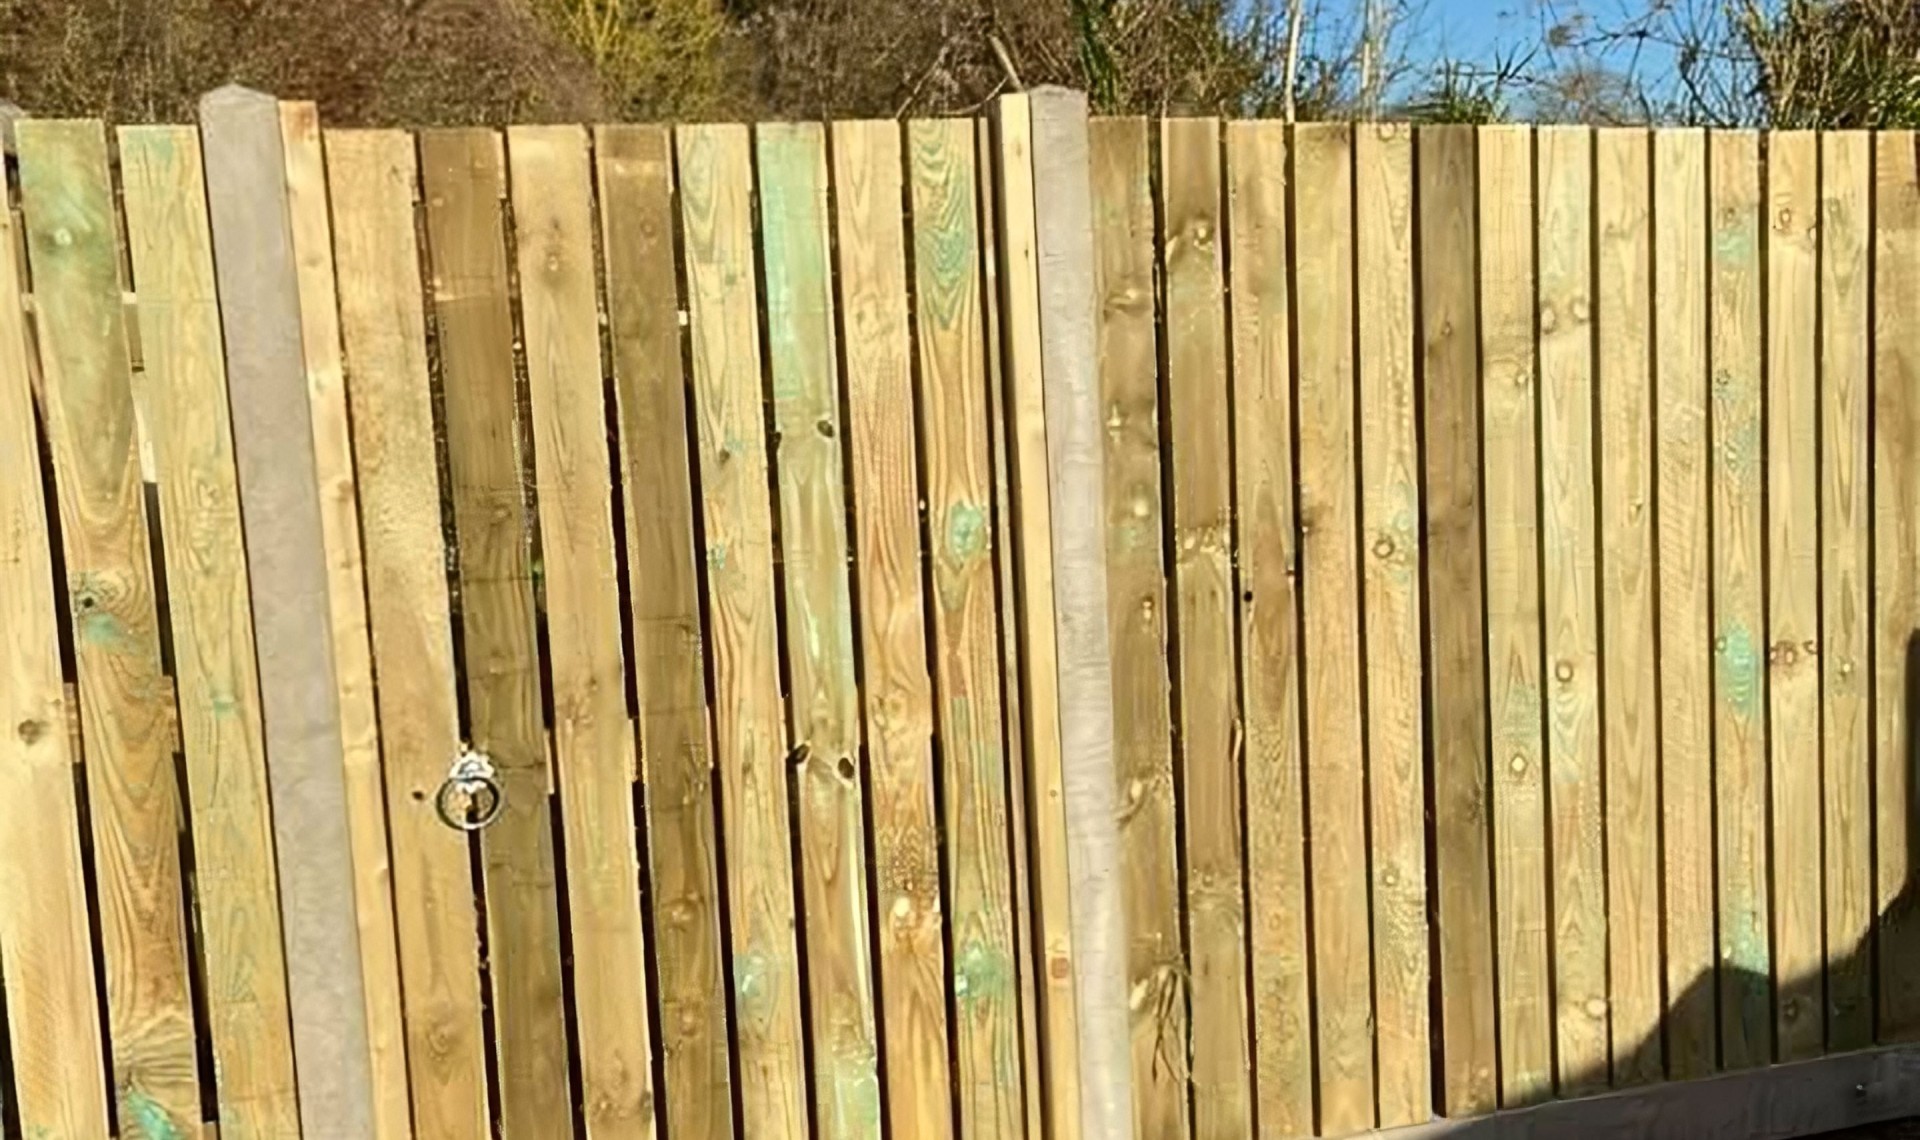 Completed fencing for dobbies garden centre with close up of wooden gate.